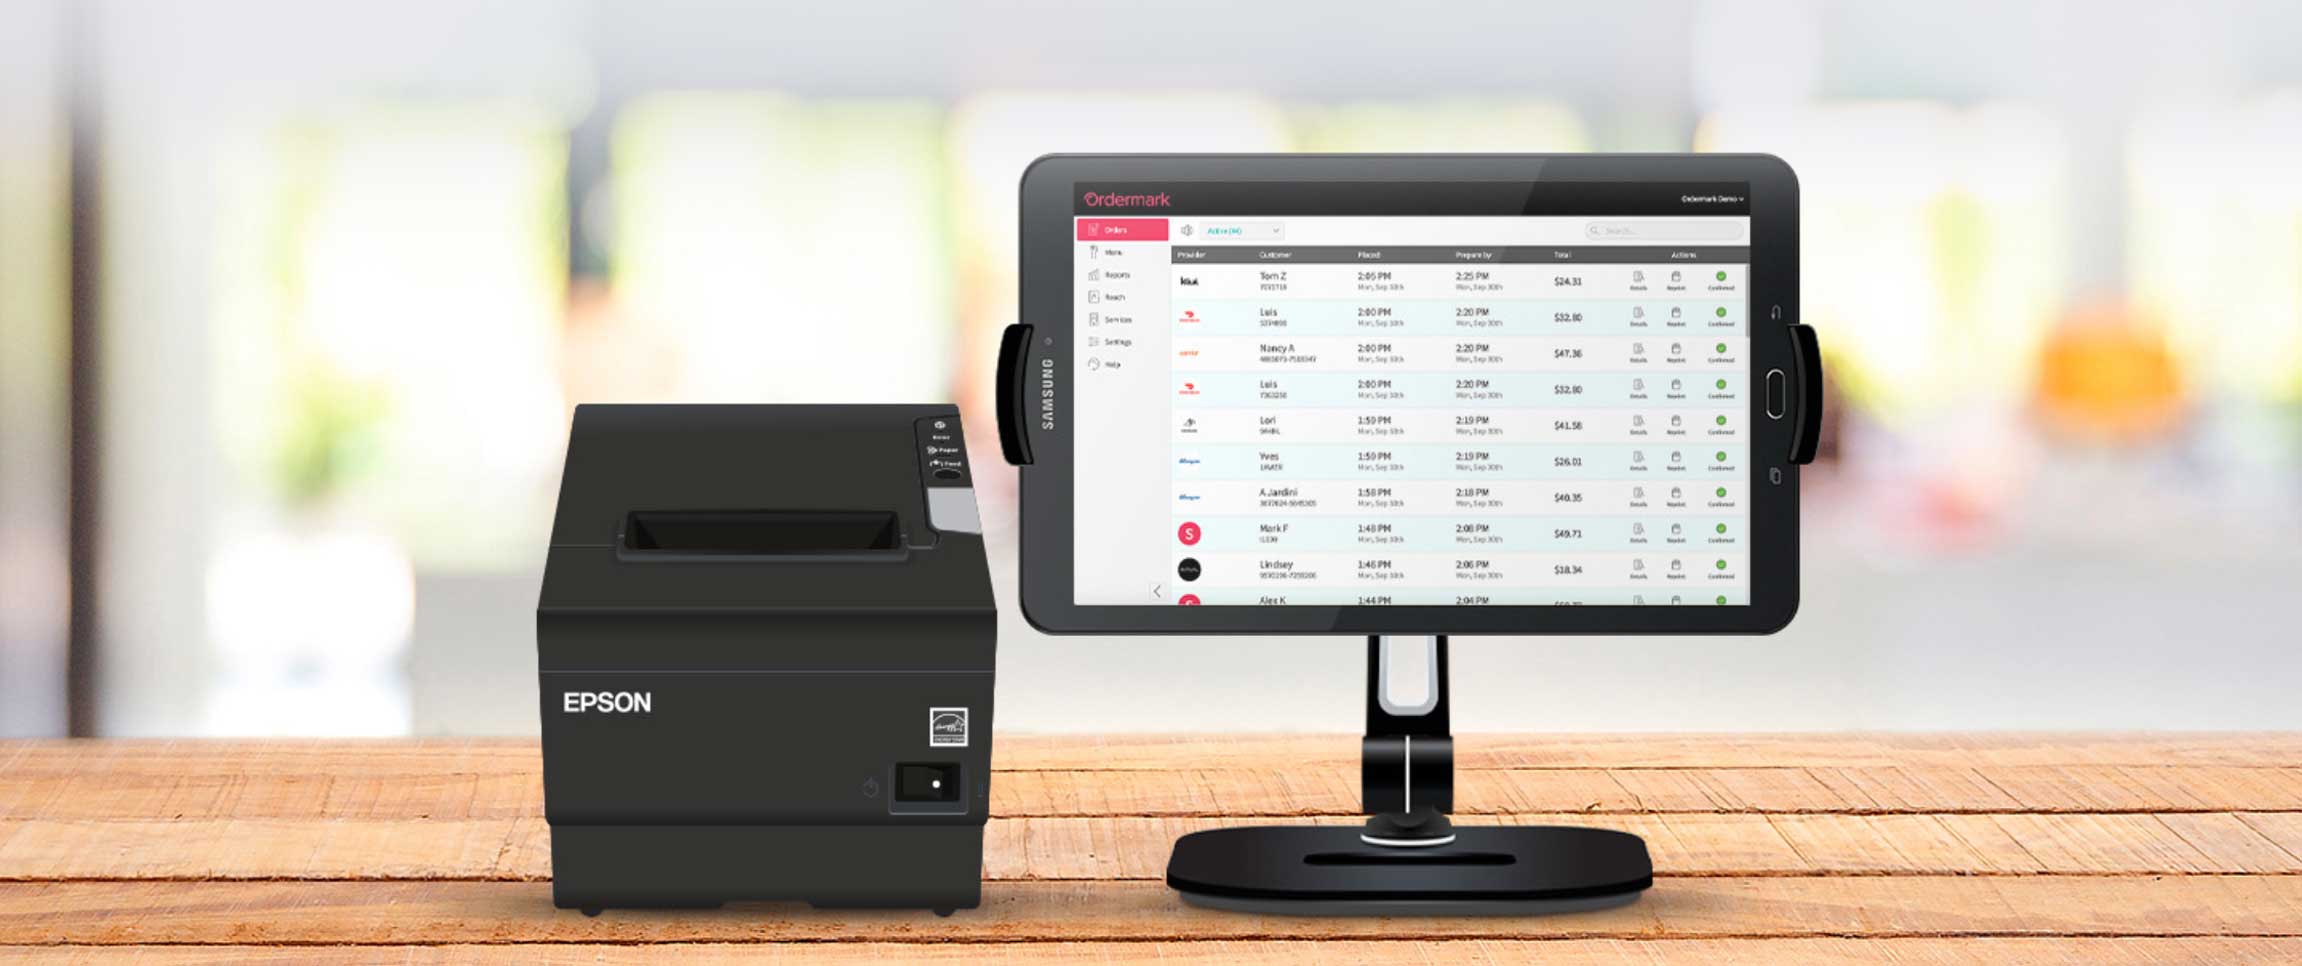 Ordermark system and printer on a restaurant counter